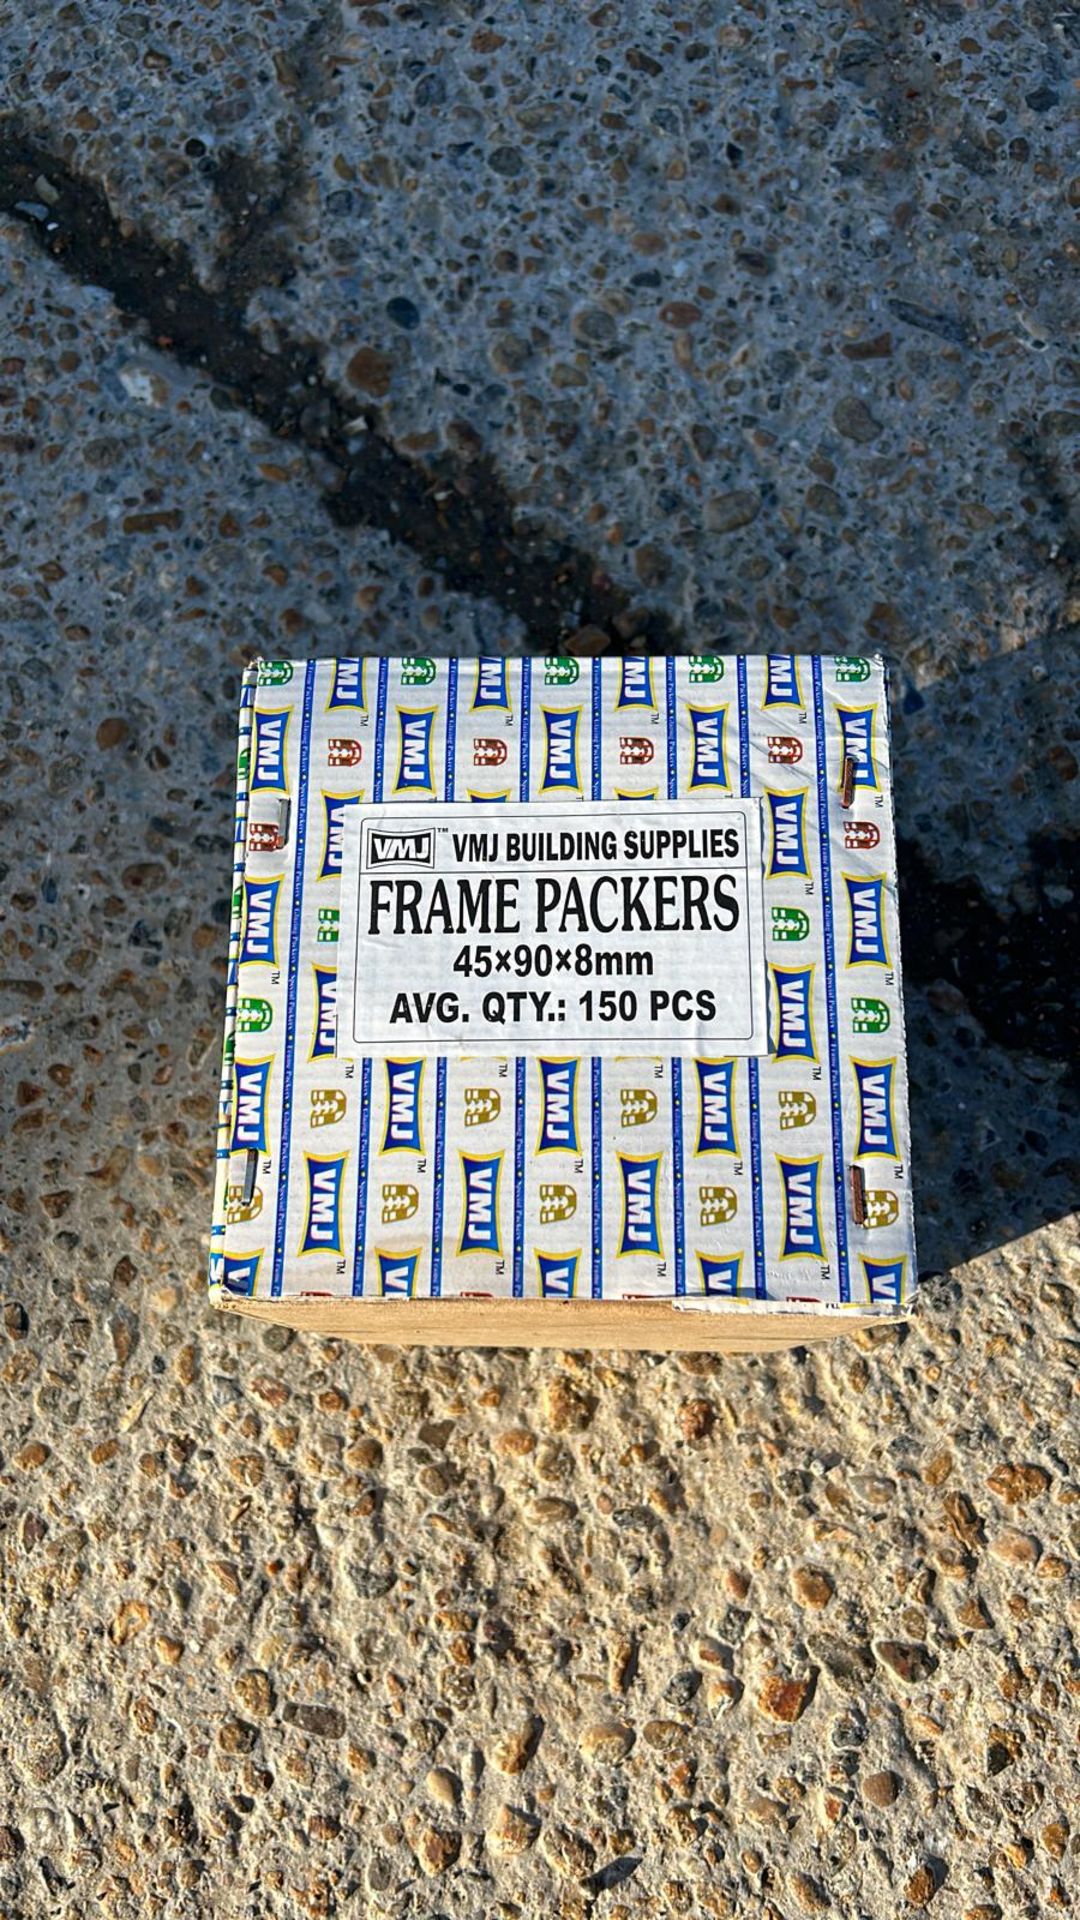 1 Box of Frame Packers, 8mm 45×90 - Image 2 of 2